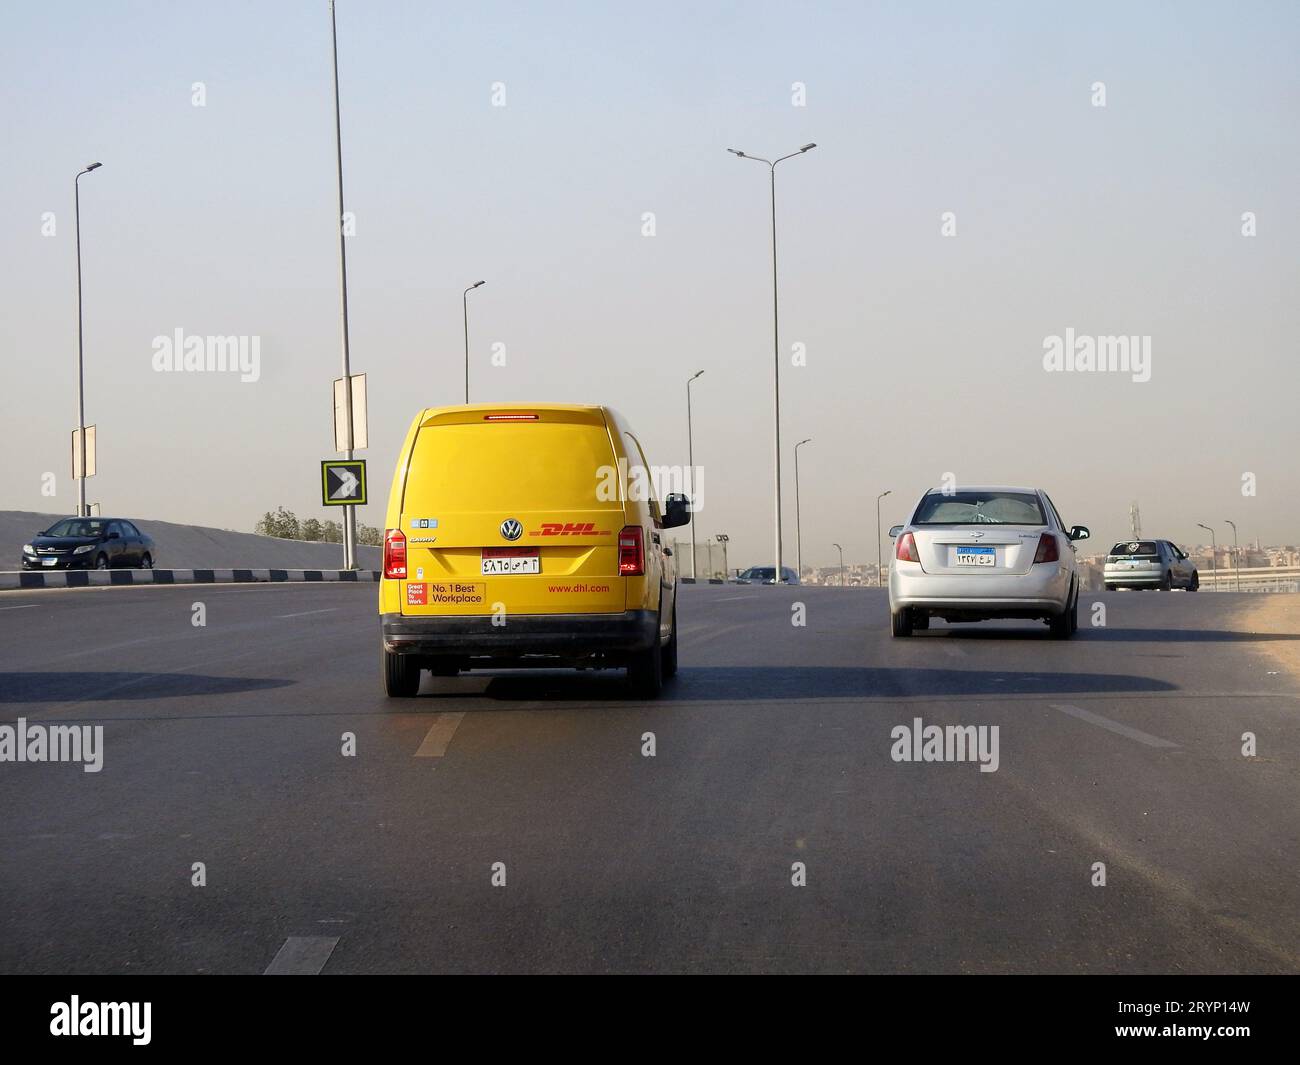 Cairo, Egypt, August 31 2023: DHL truck on its way delivering a package, DHL is the global leader in the logistics industry specializing in internatio Stock Photo